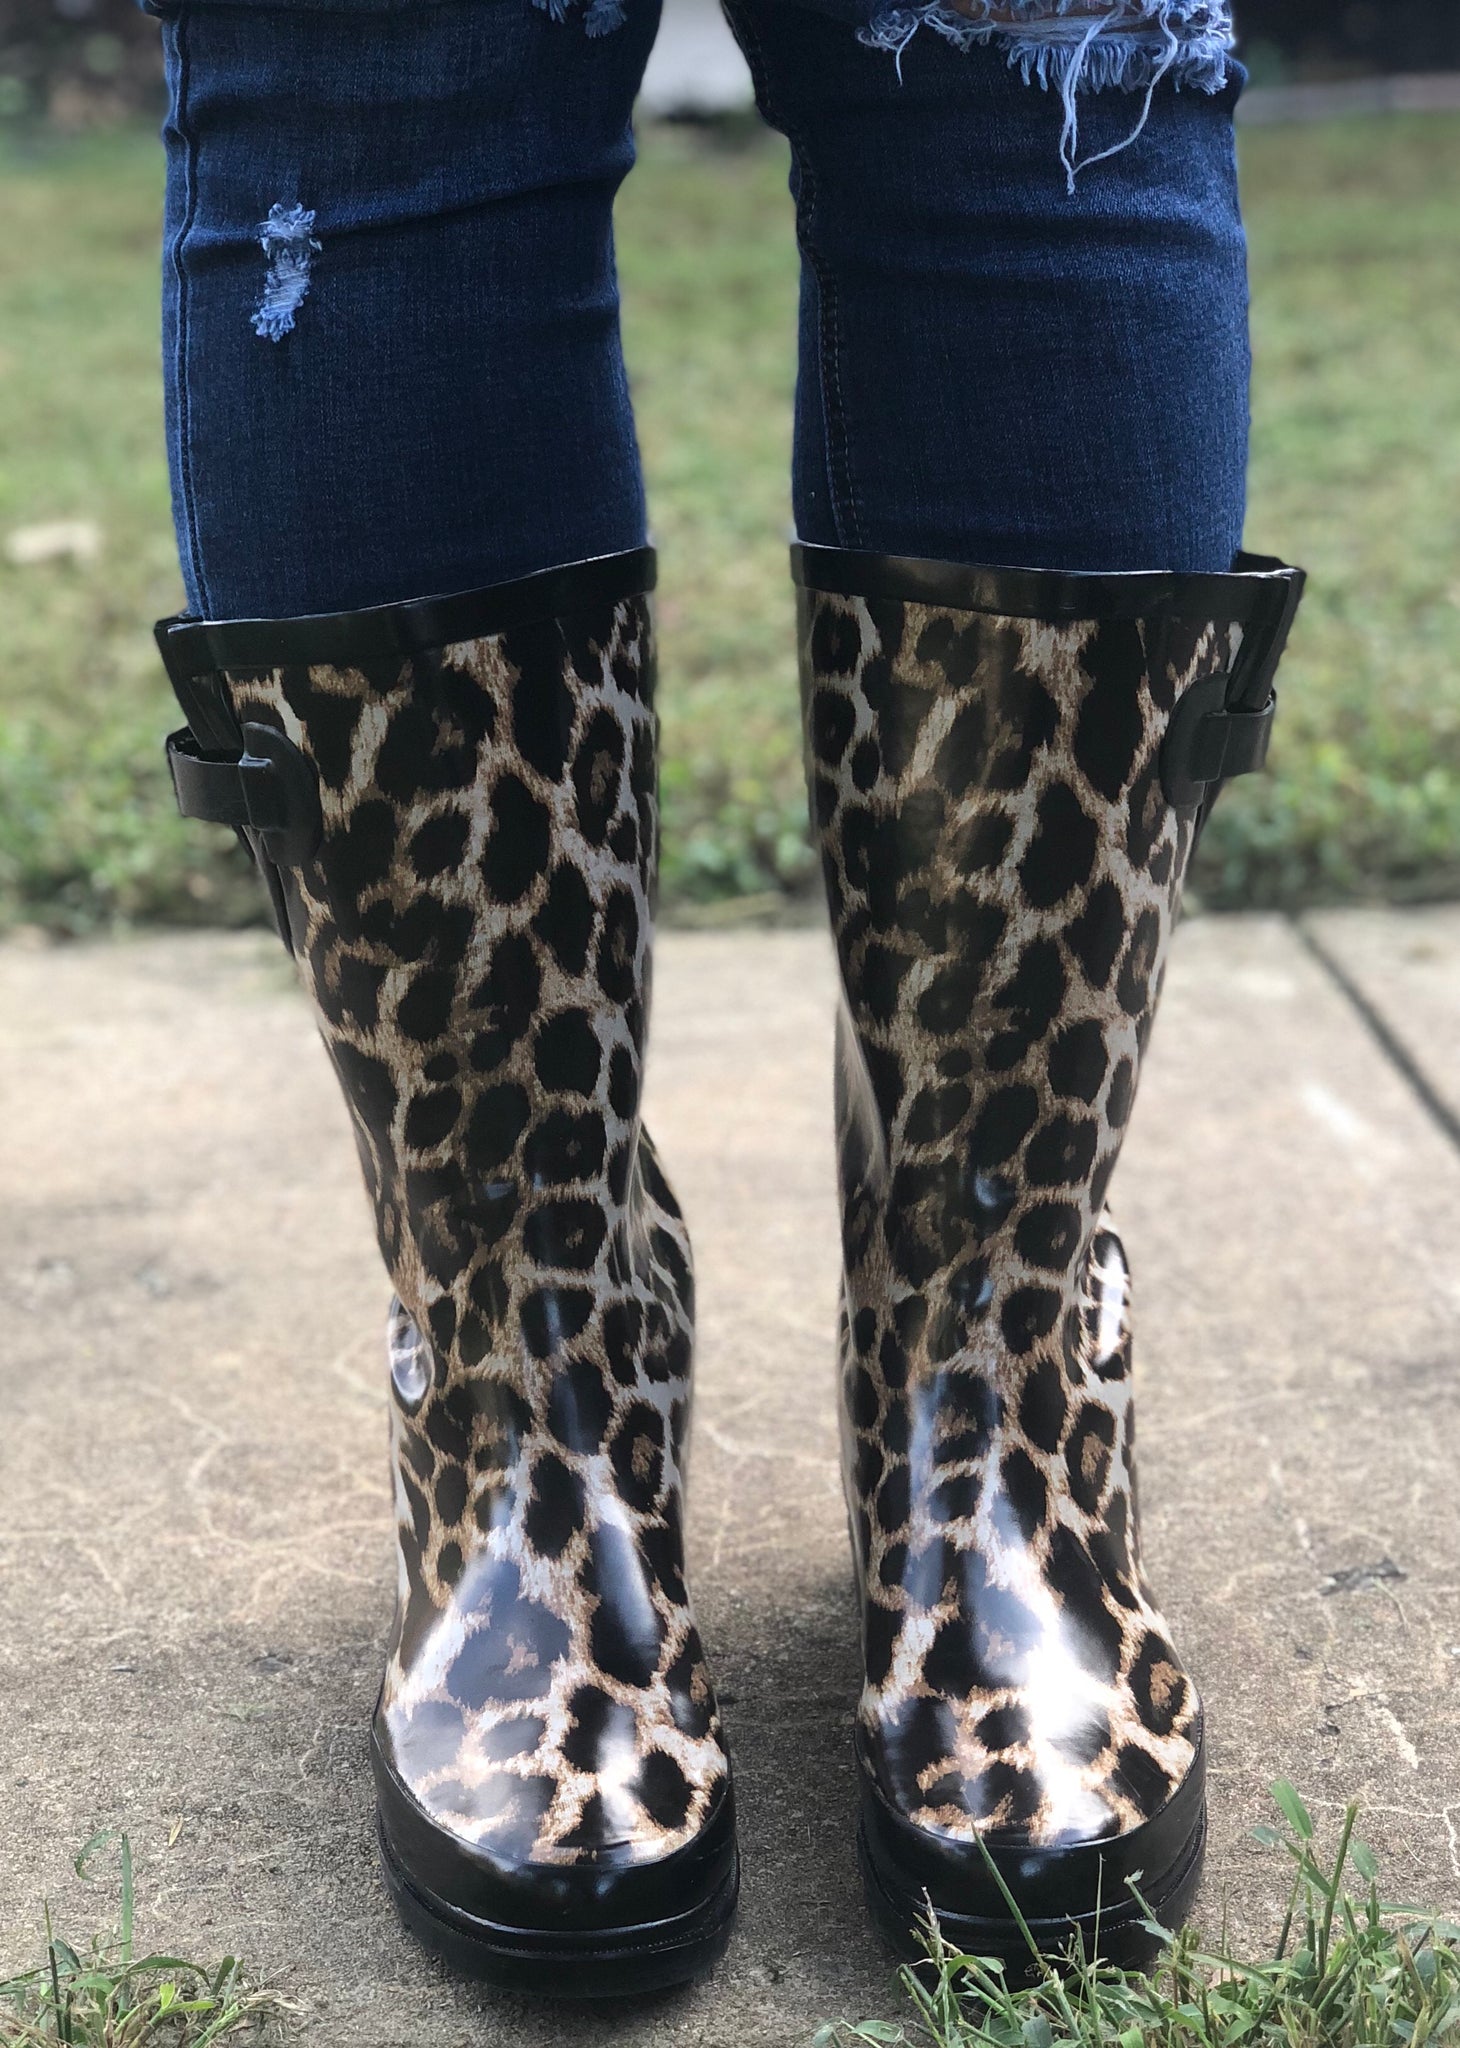 leopard ankle boots size 11